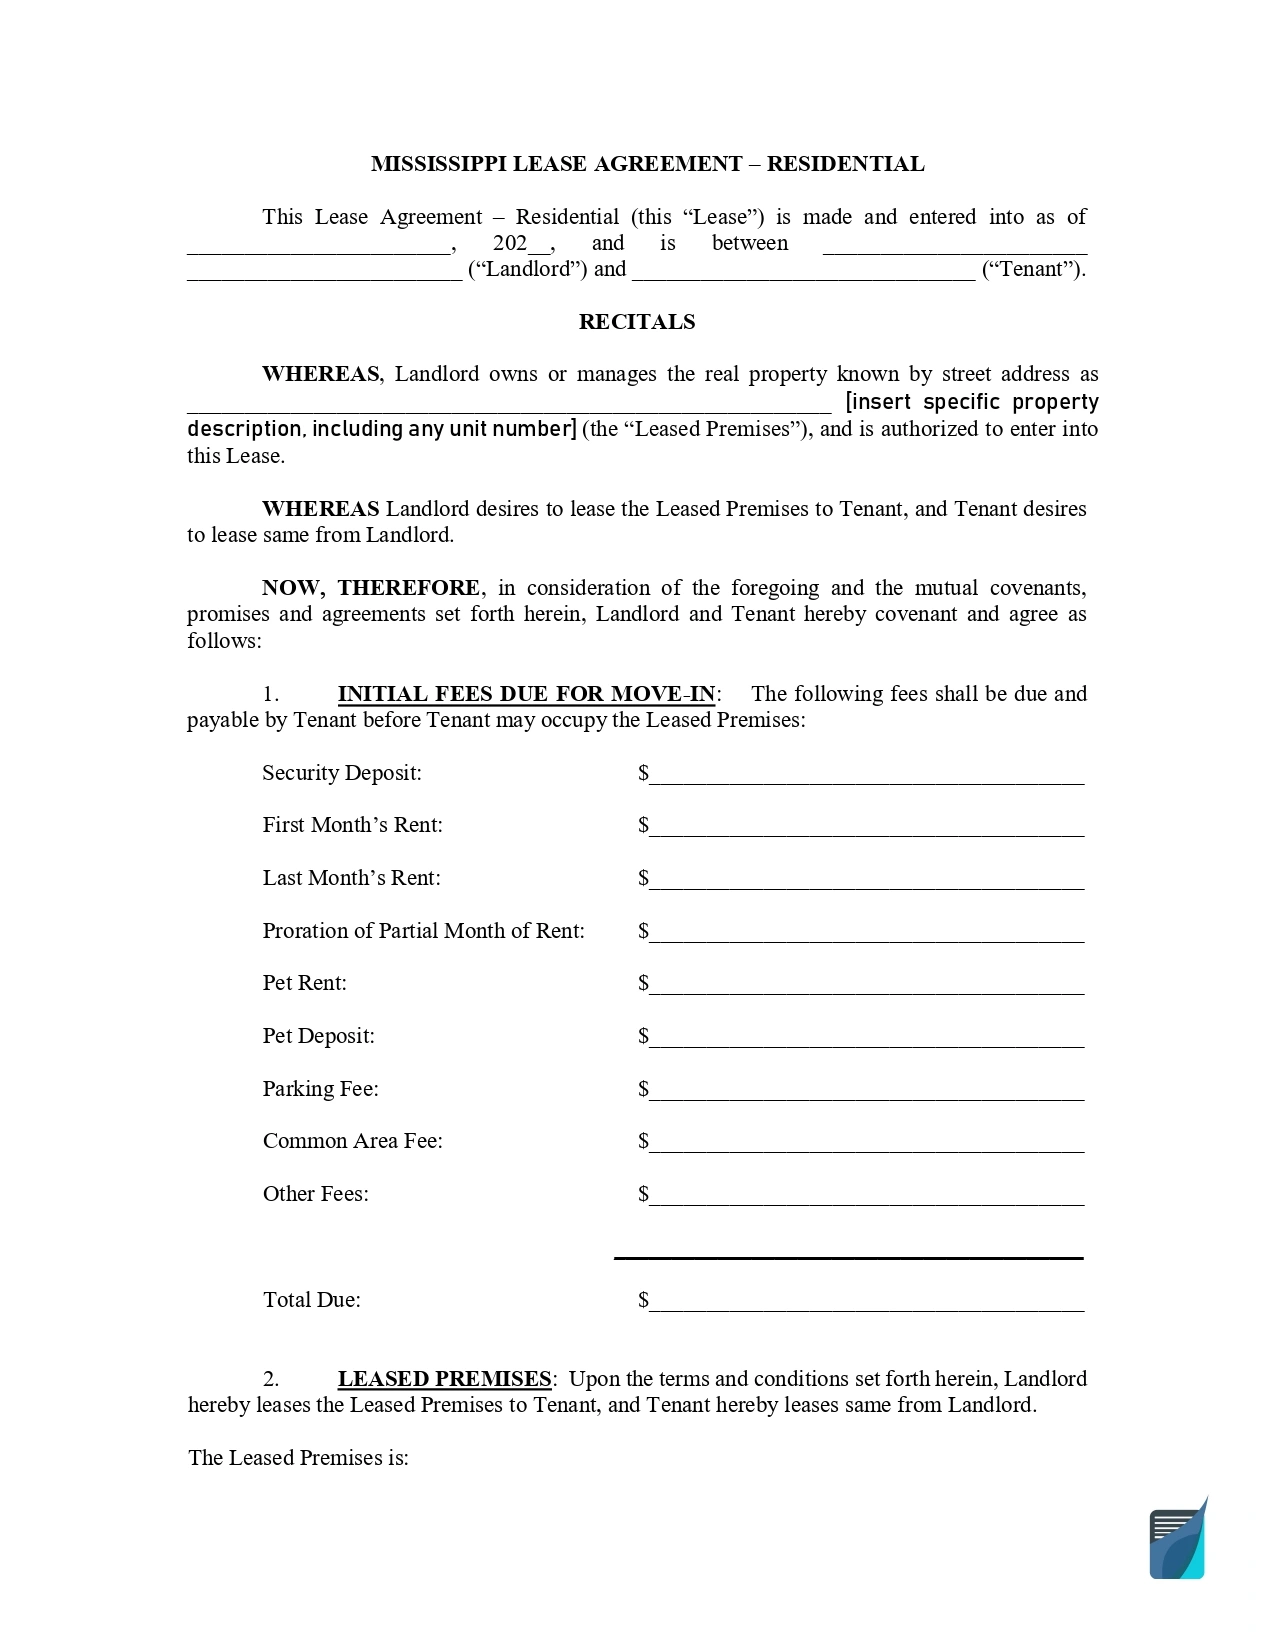 Mississippi-Lease-Agreement-Residential-Form